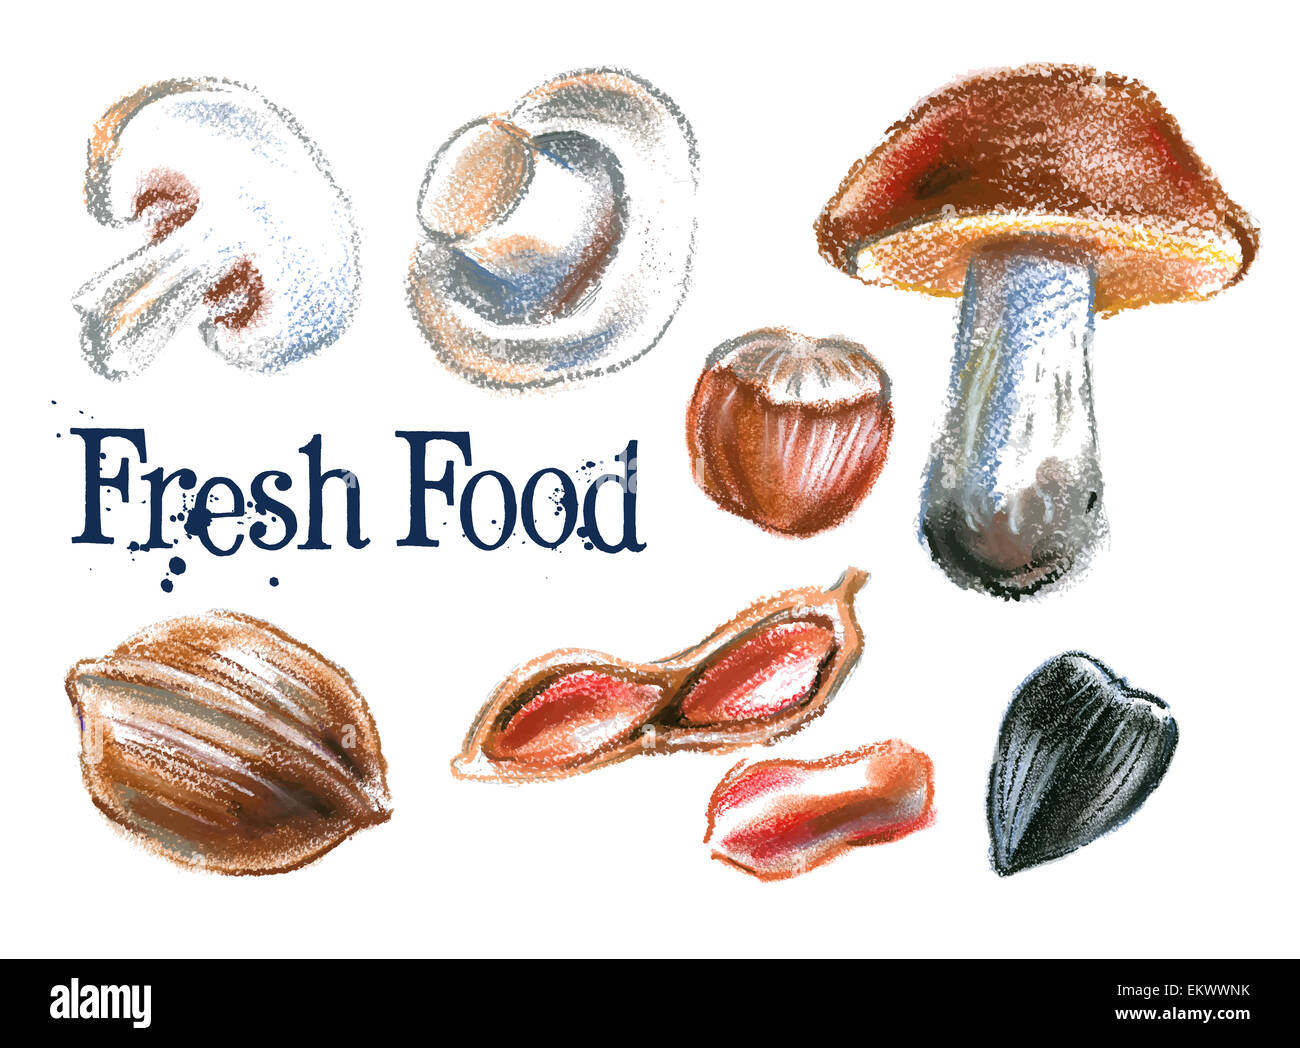 fresh food vector logo design template. mushrooms, nuts or sunflower seeds icon. Stock Photo